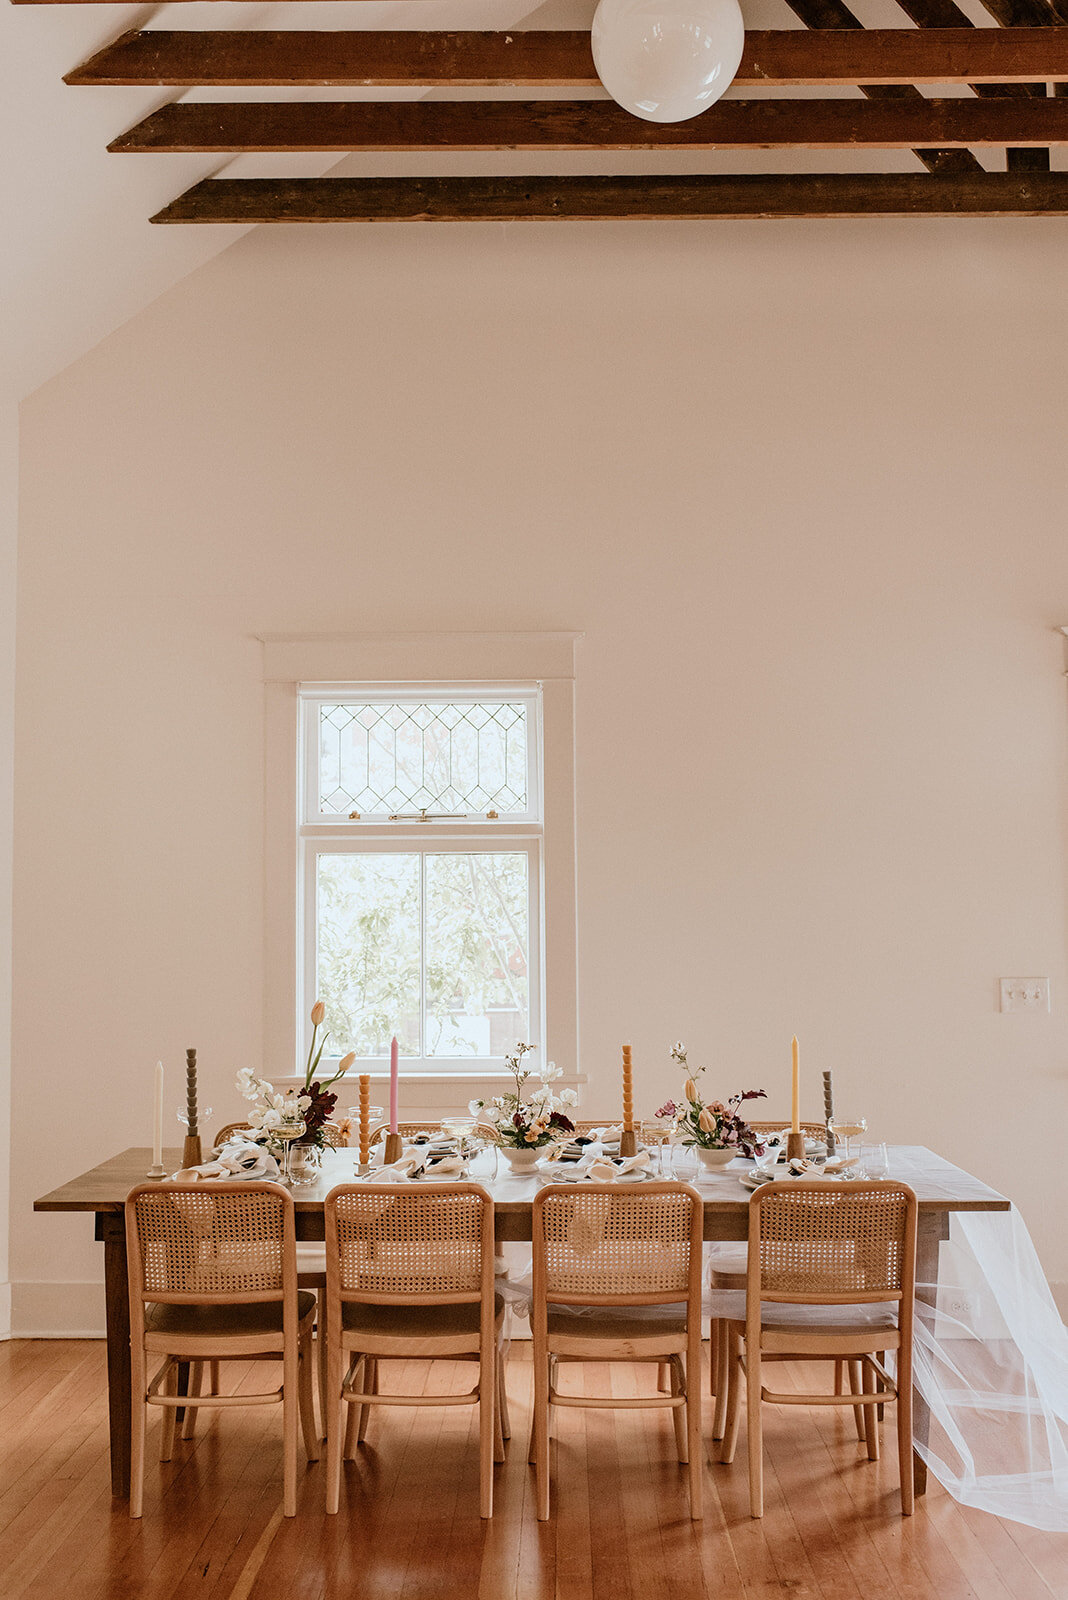 a-Lily-and-cane-event-furniture-rental-portland-farm-table-wedding-reception-20